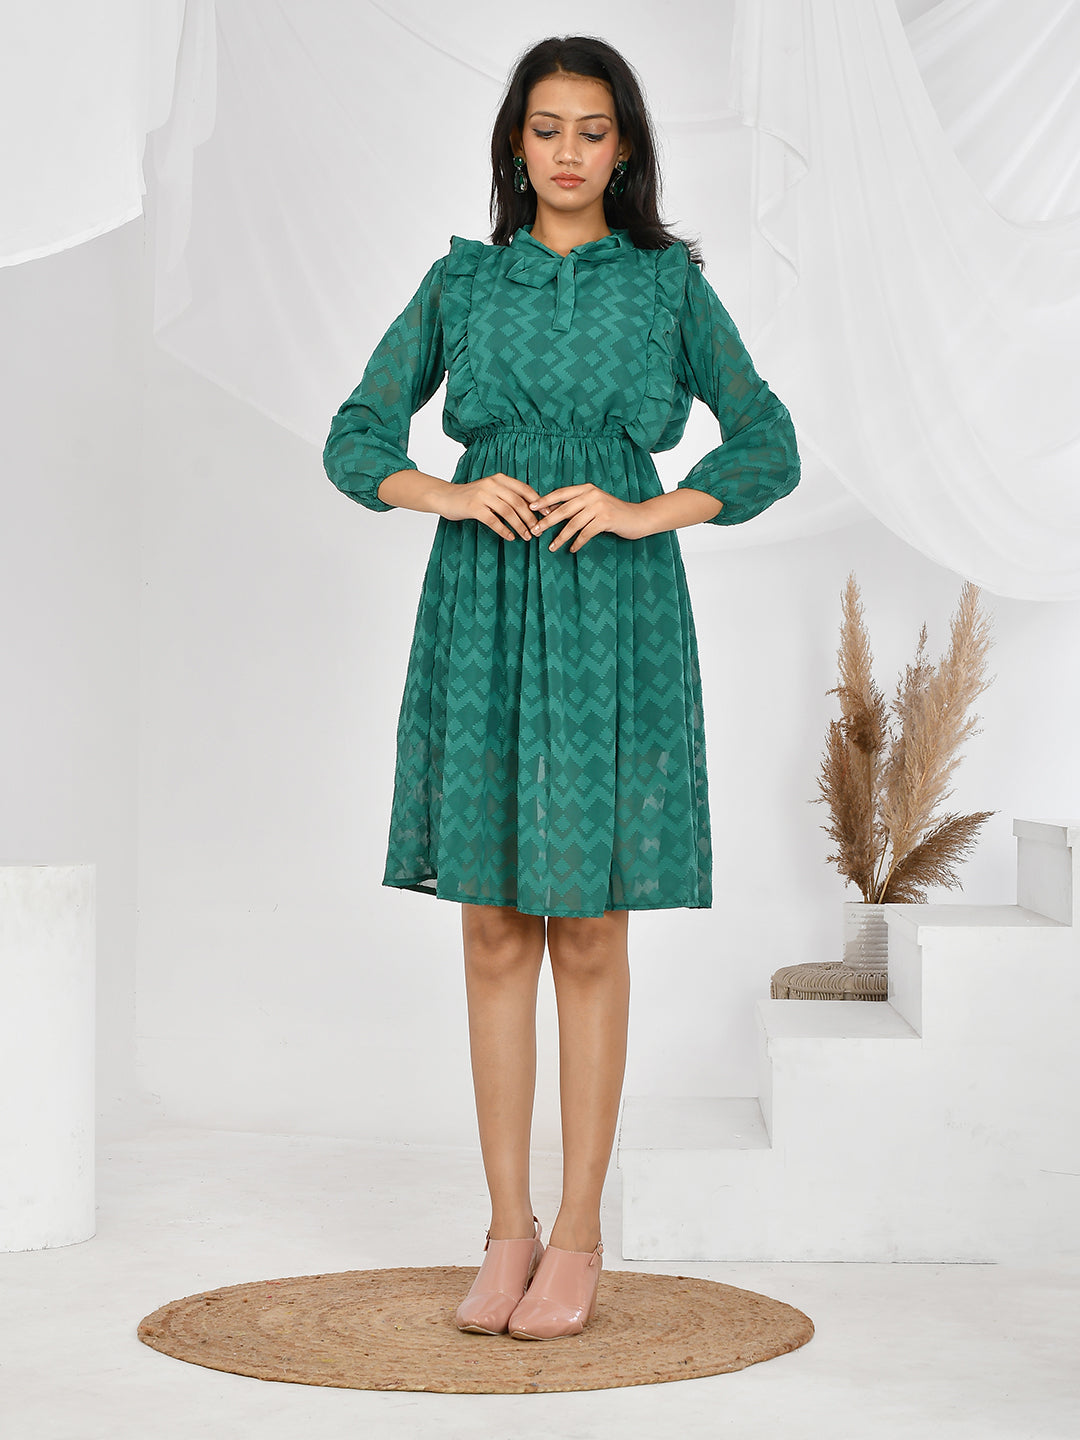 Shop This stylish and elegant dress features a vibrant green print, making it perfect for parties and special occasions. Designed for girls and women, it combines fashion with comfort for a flattering and confident look. Upgrade your wardrobe with this versatile piece that will make you stand out in any crowd.